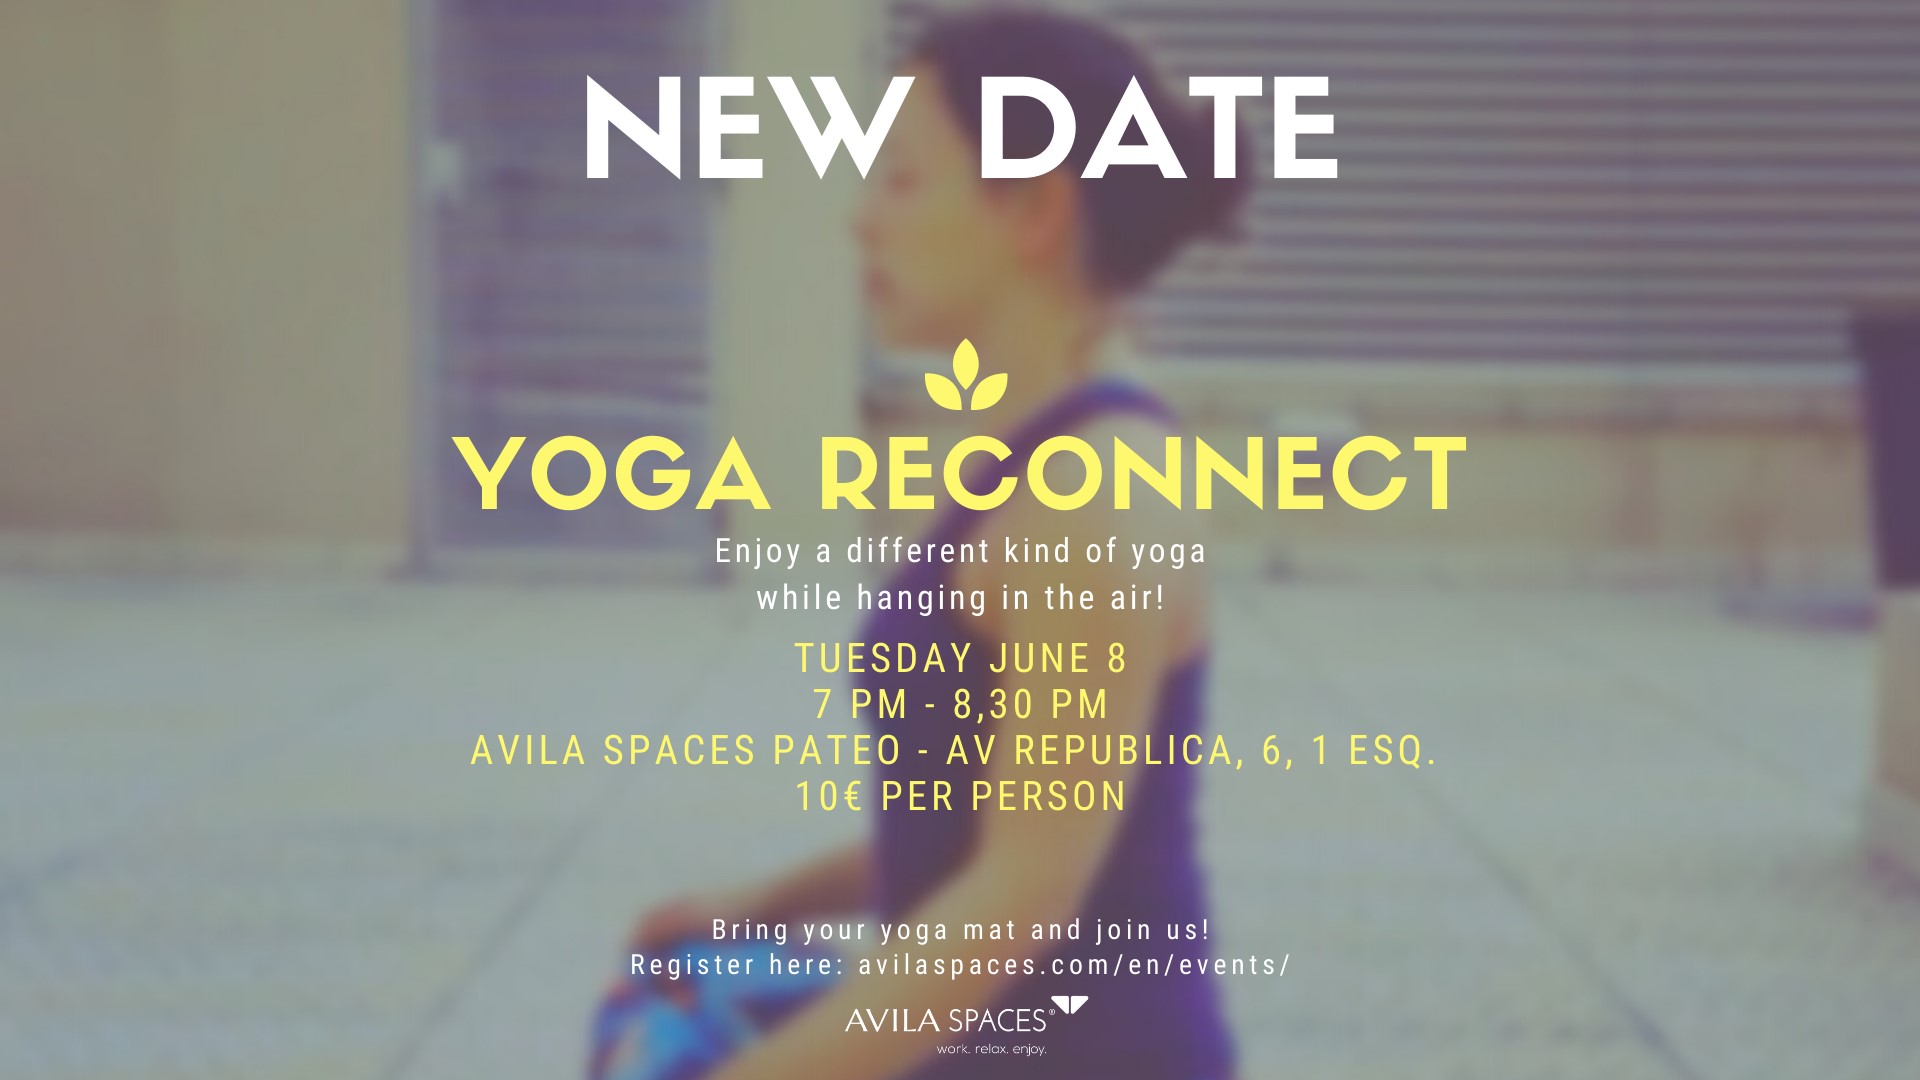 NEW DATE  (DIA 08/06/2021) - Let´s Reconnect with Yoga in the Pateo